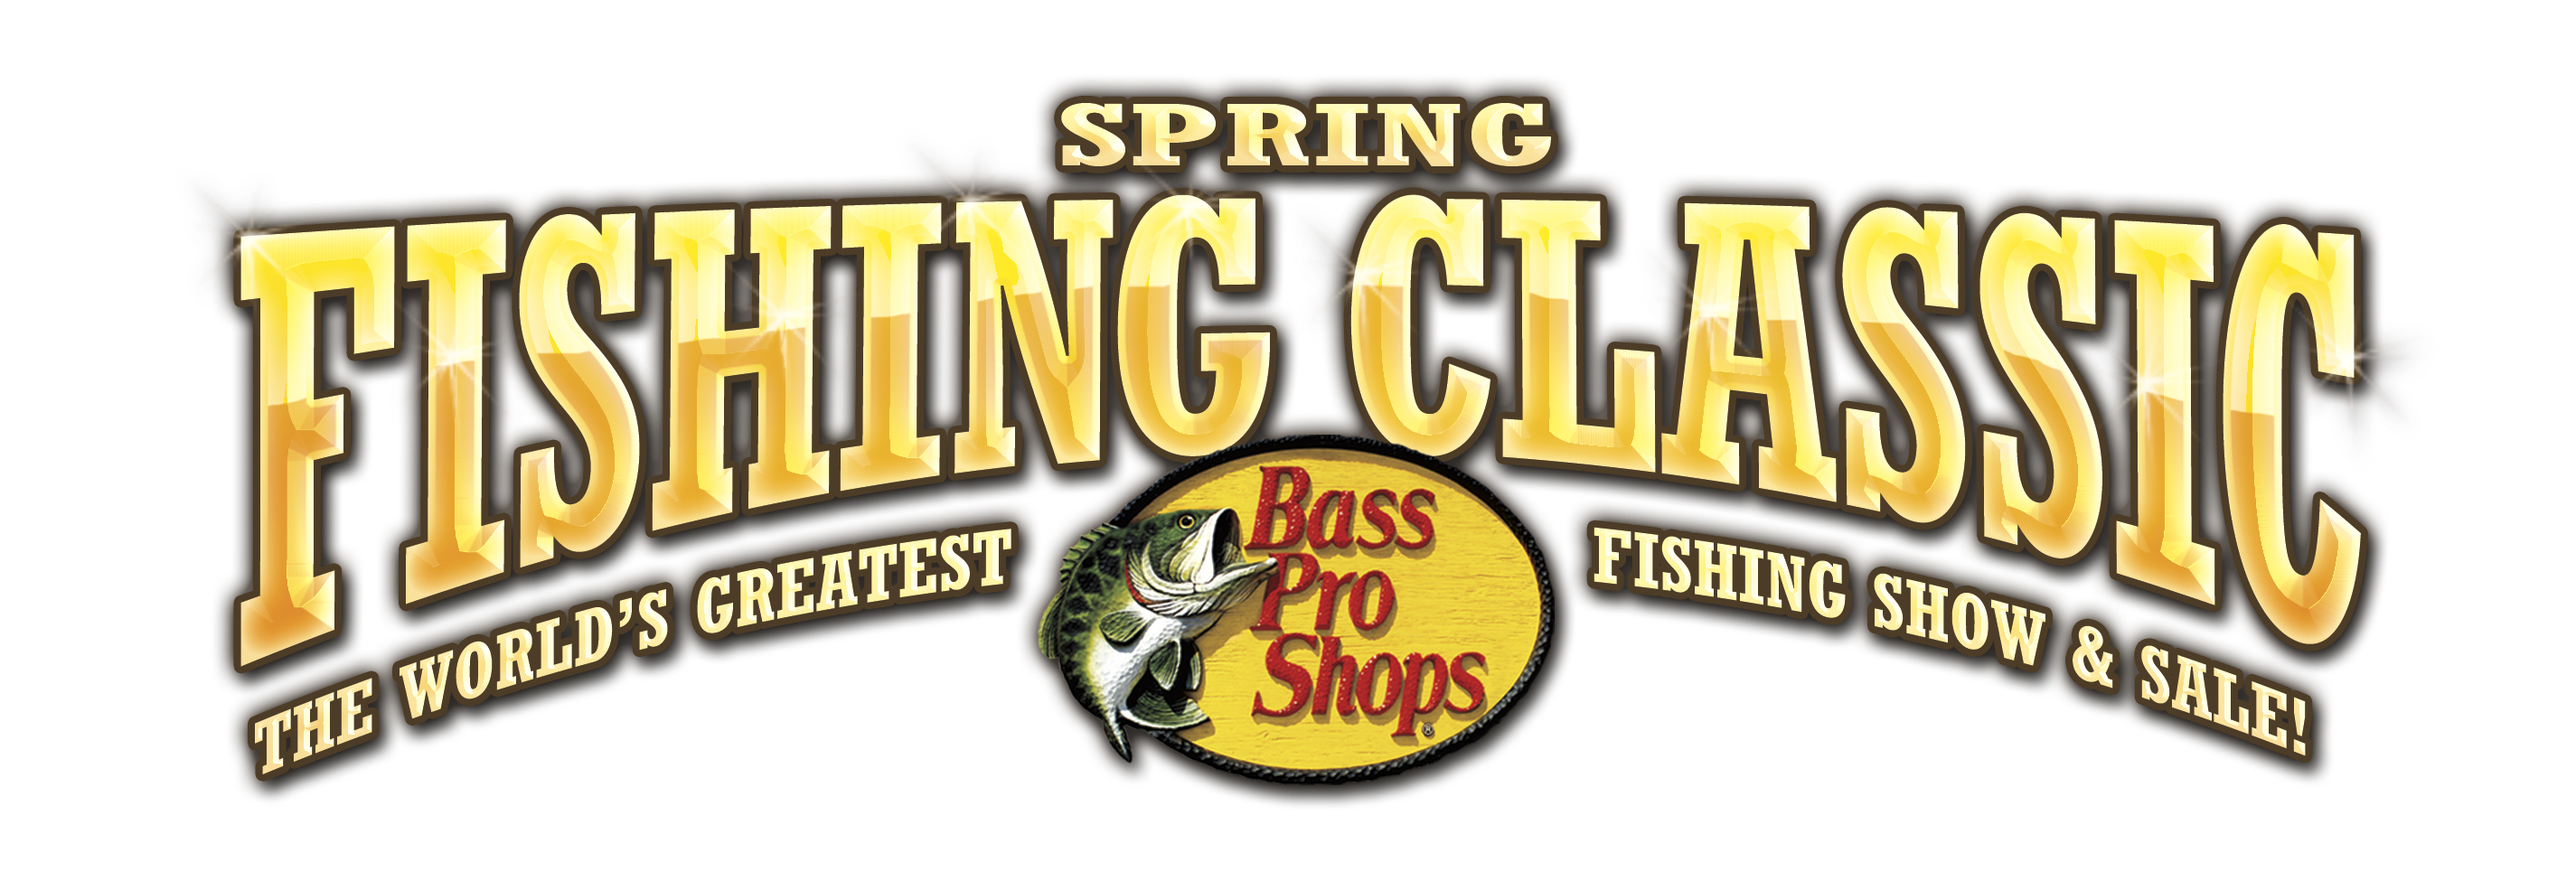 2014 Spring Fishing Classic at Bass Pro Shops